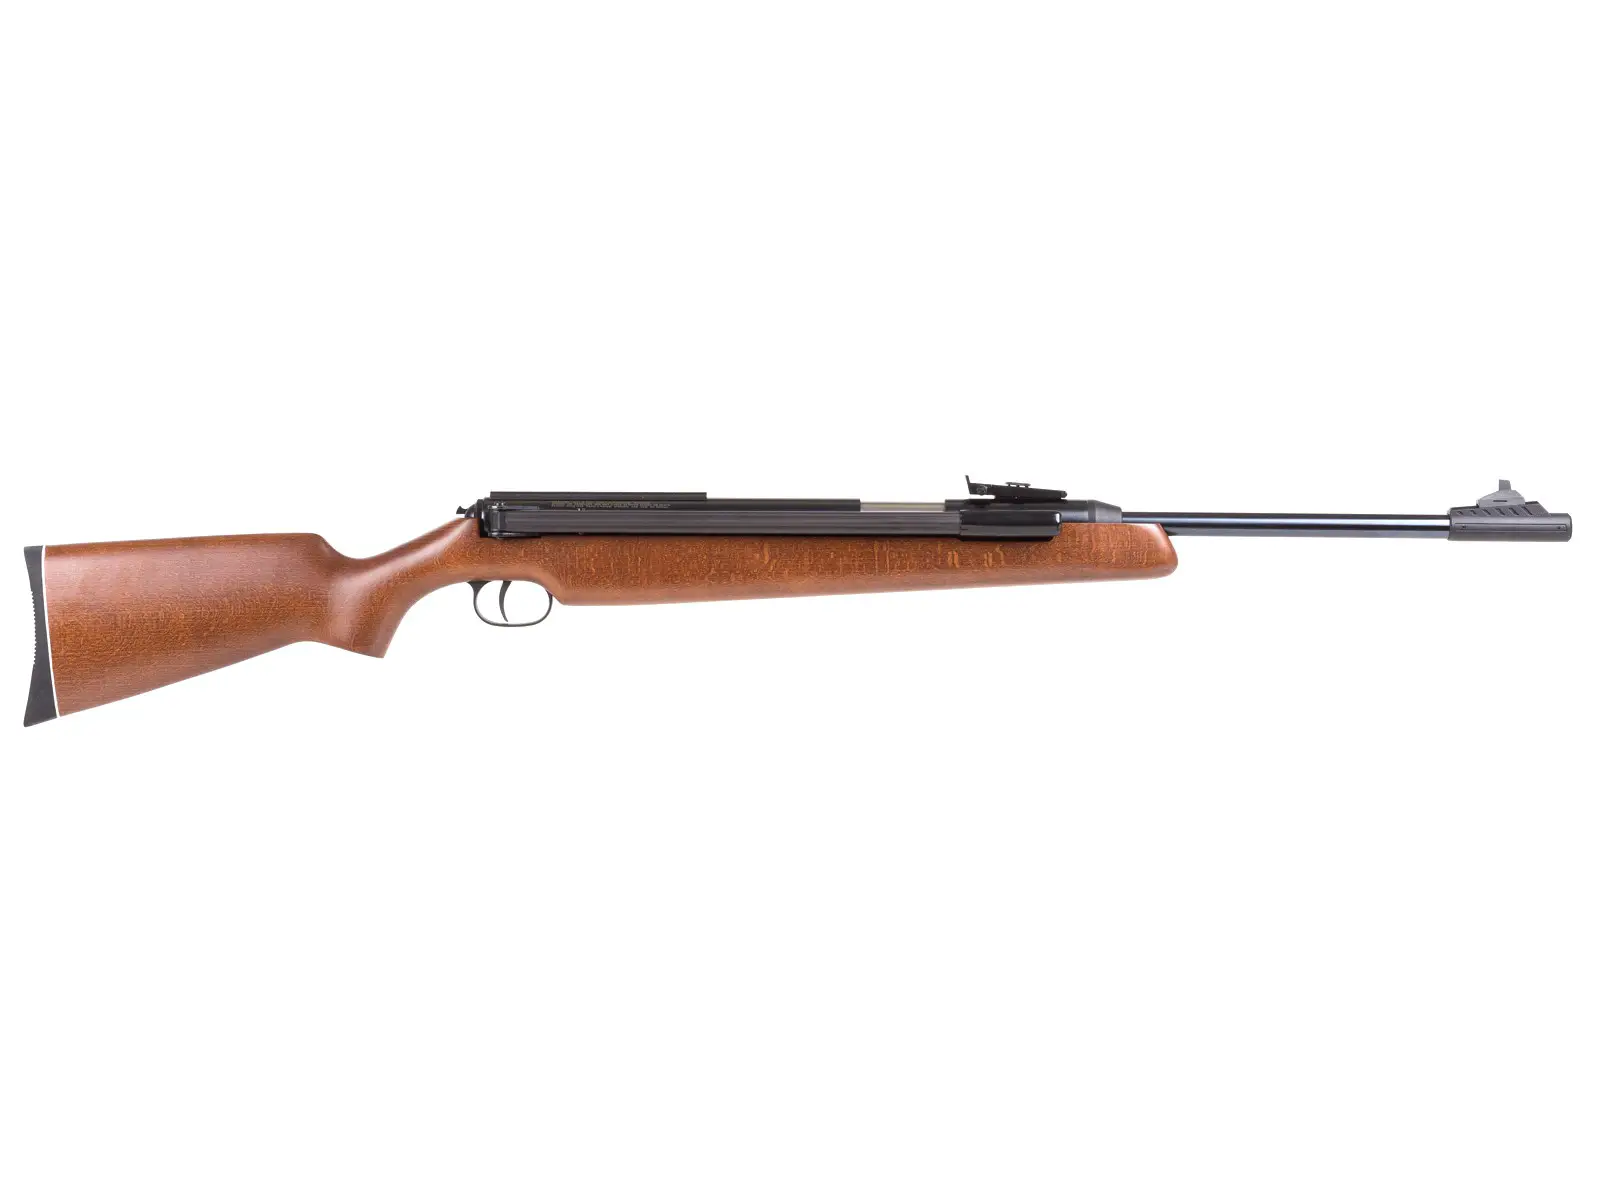 48 1 Best Spring Air Rifles - Top 7 Springers for the money (Reviews & Buying Guides 2022)